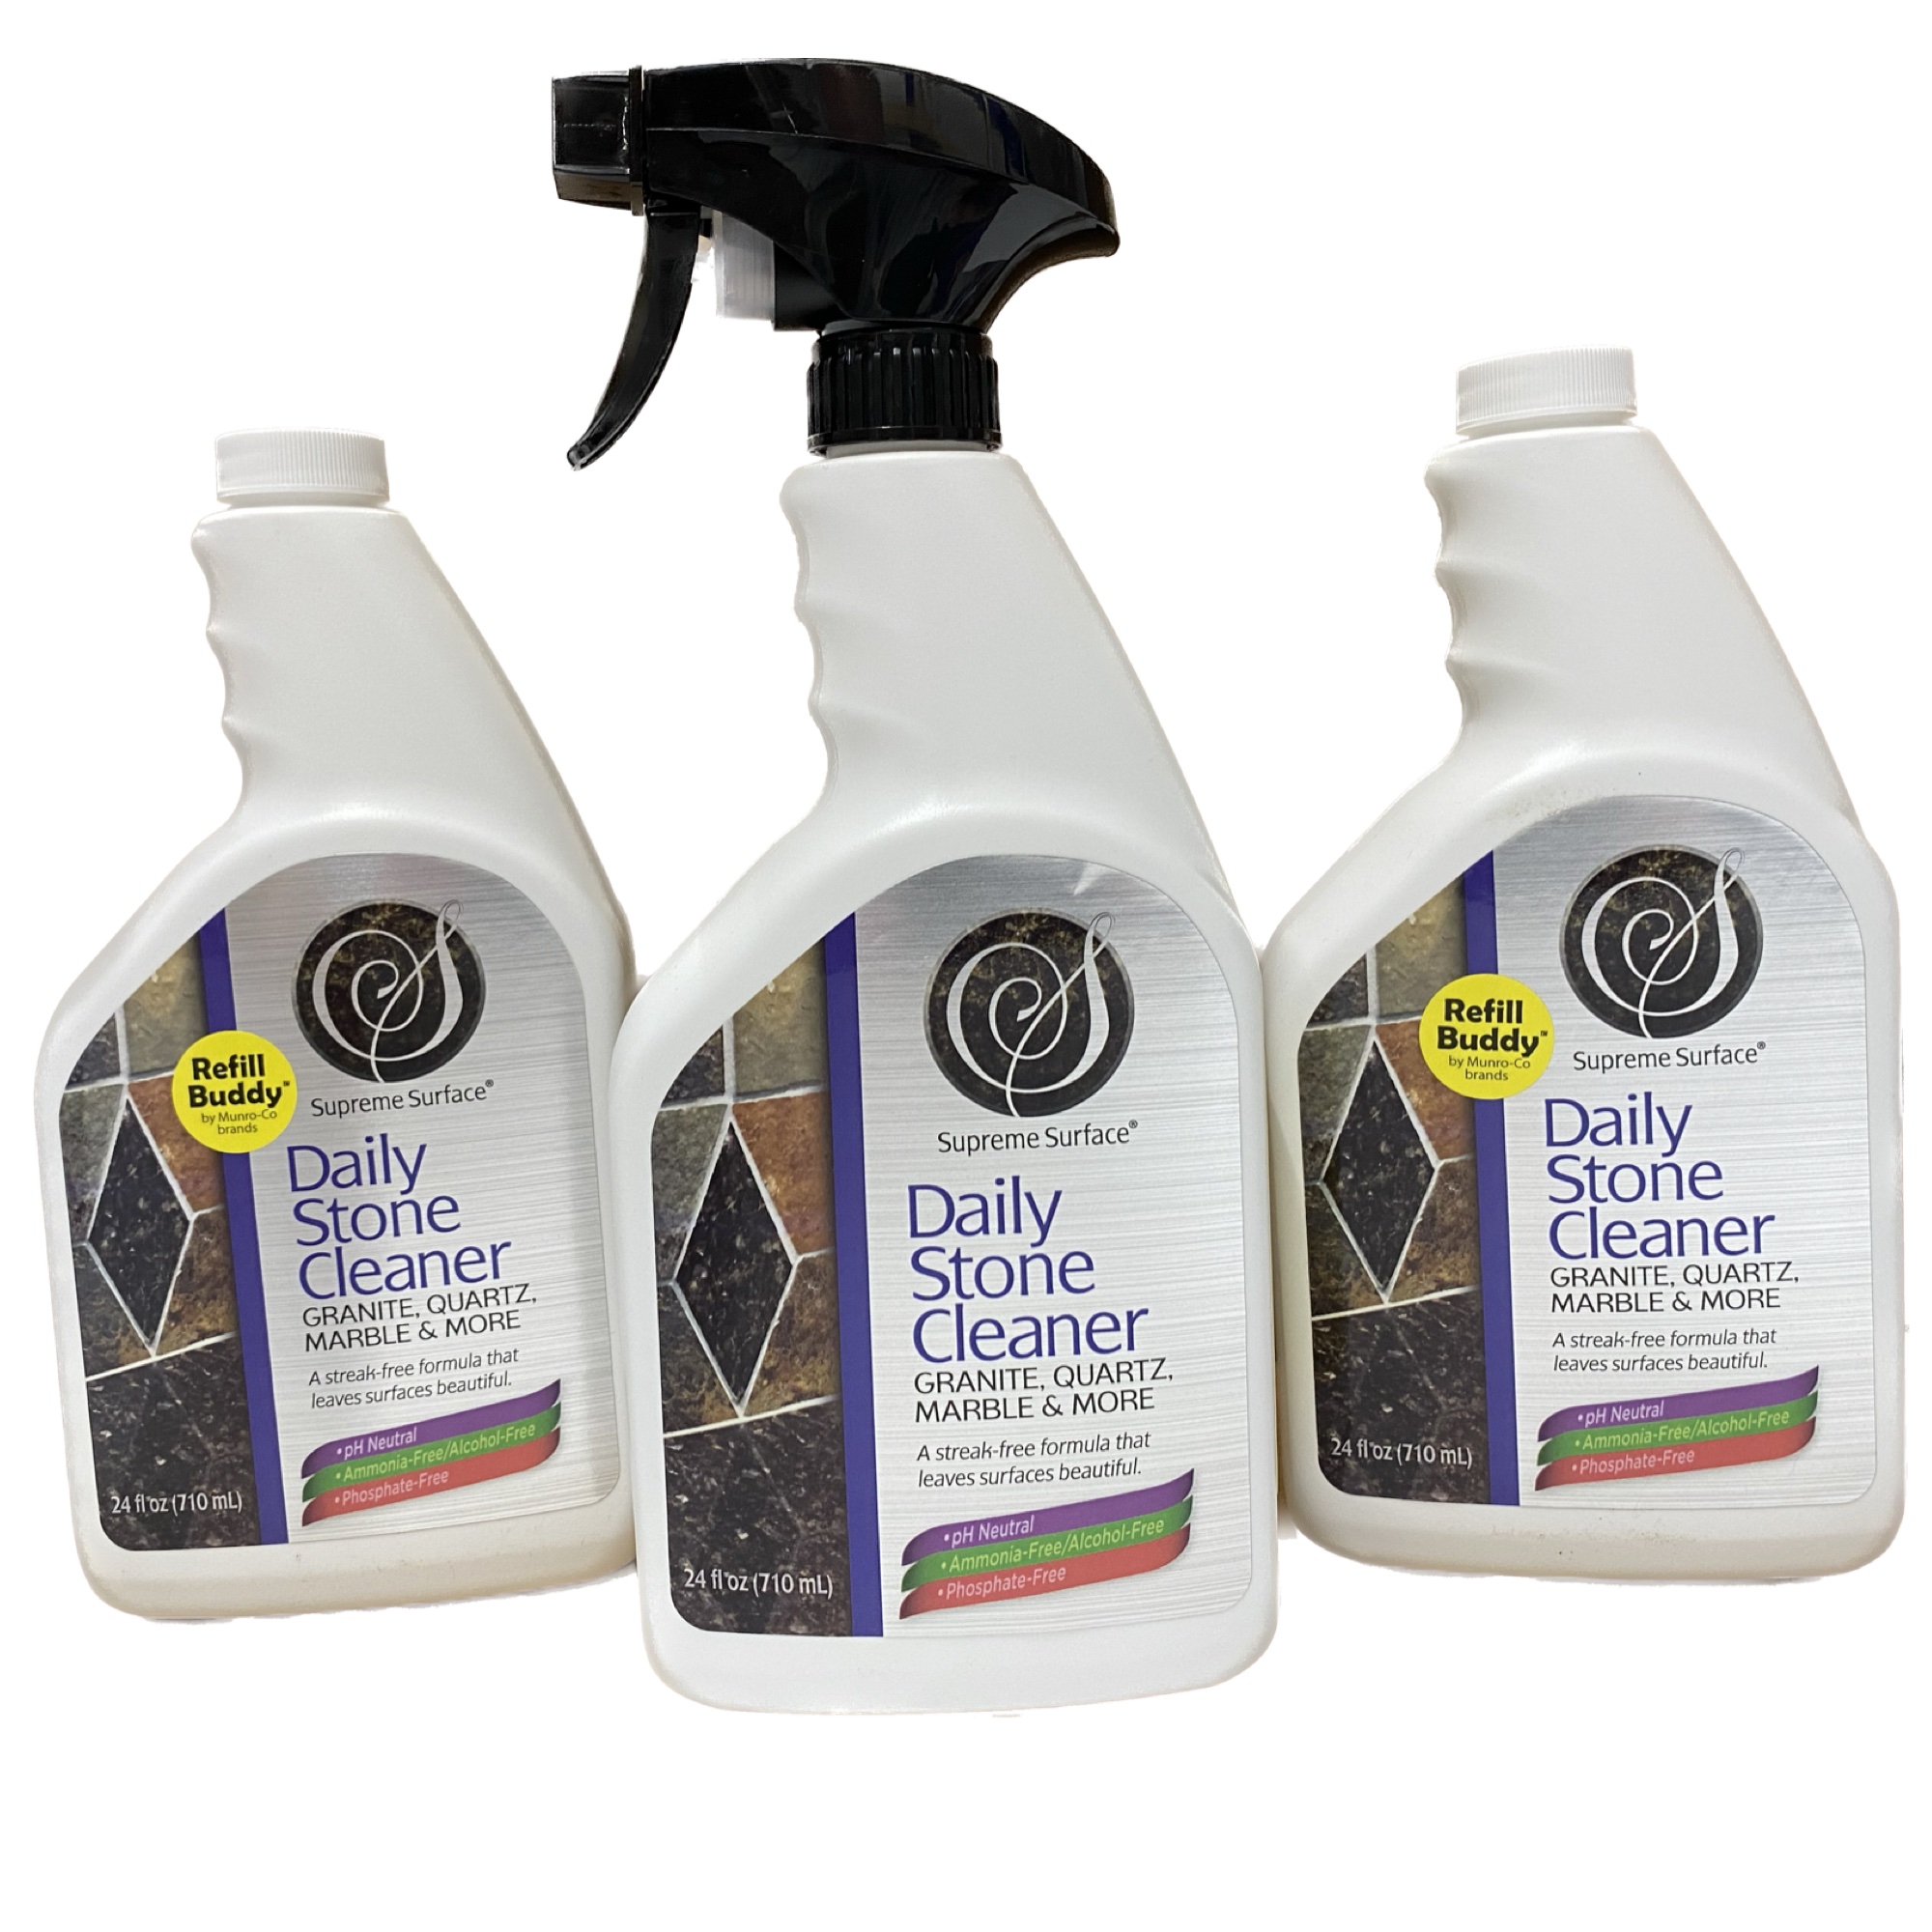 supreme surface daily stone cleaners for granite quartz marble and more, 24oz spray with 24oz refills